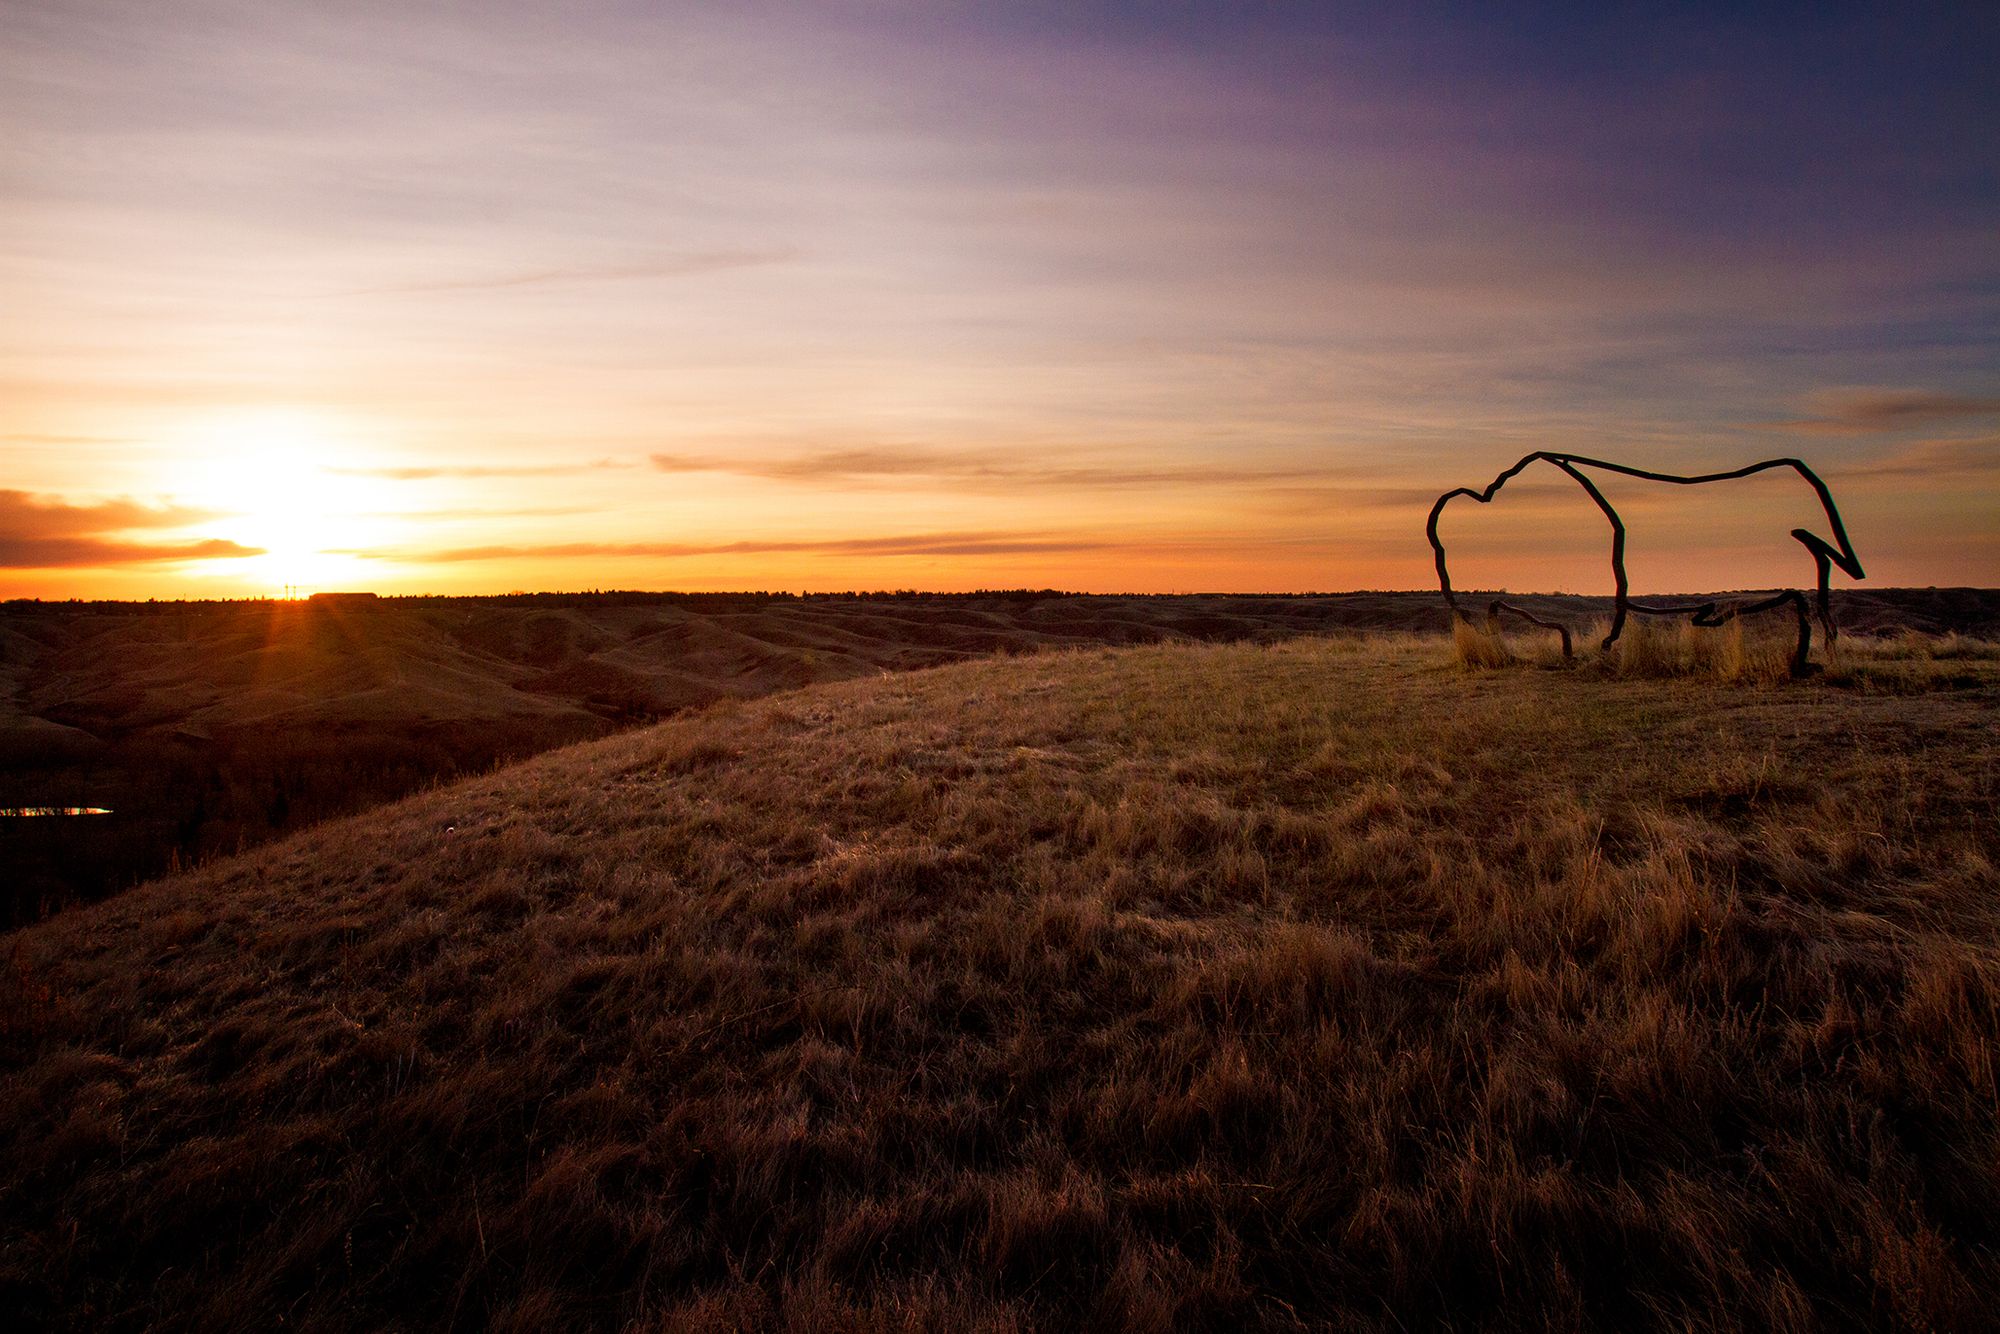 A sculpture of the outline of a buffalo on a grassy hill at the ULethbridge campus with the sunset in the background.